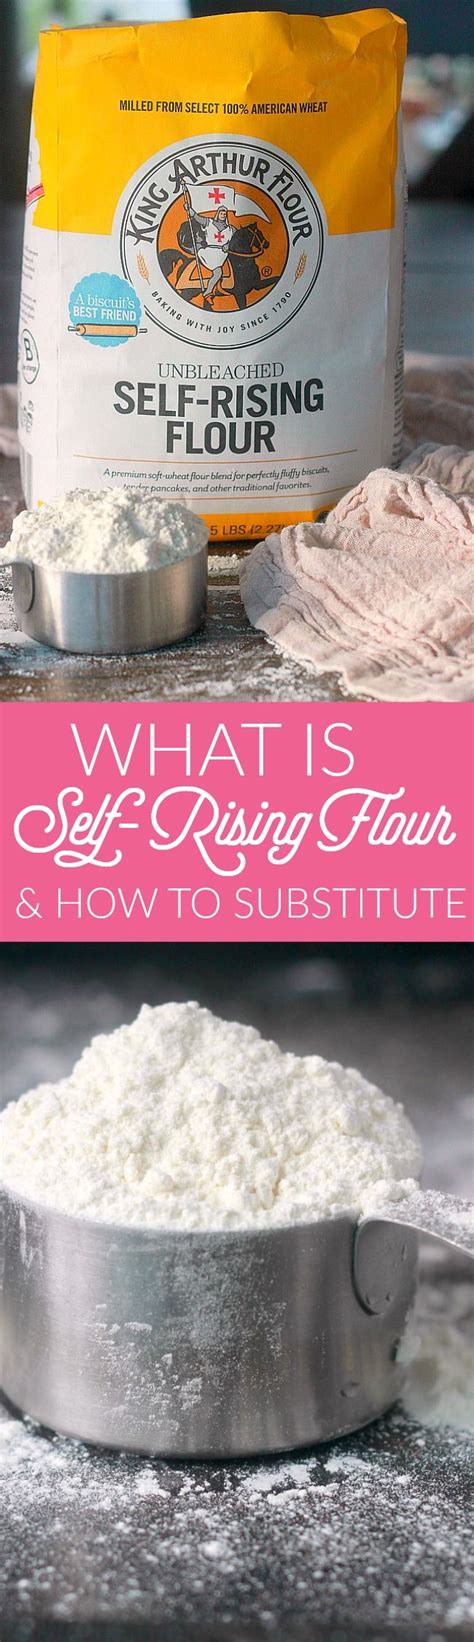 Self rising flour was invented in england in the 1800s, as a way for the leavening agents in self rising flour are only right in specific recipes with specific ingredients combinations. Self-Rising Flour Substitute | Recipe | Self rising flour ...